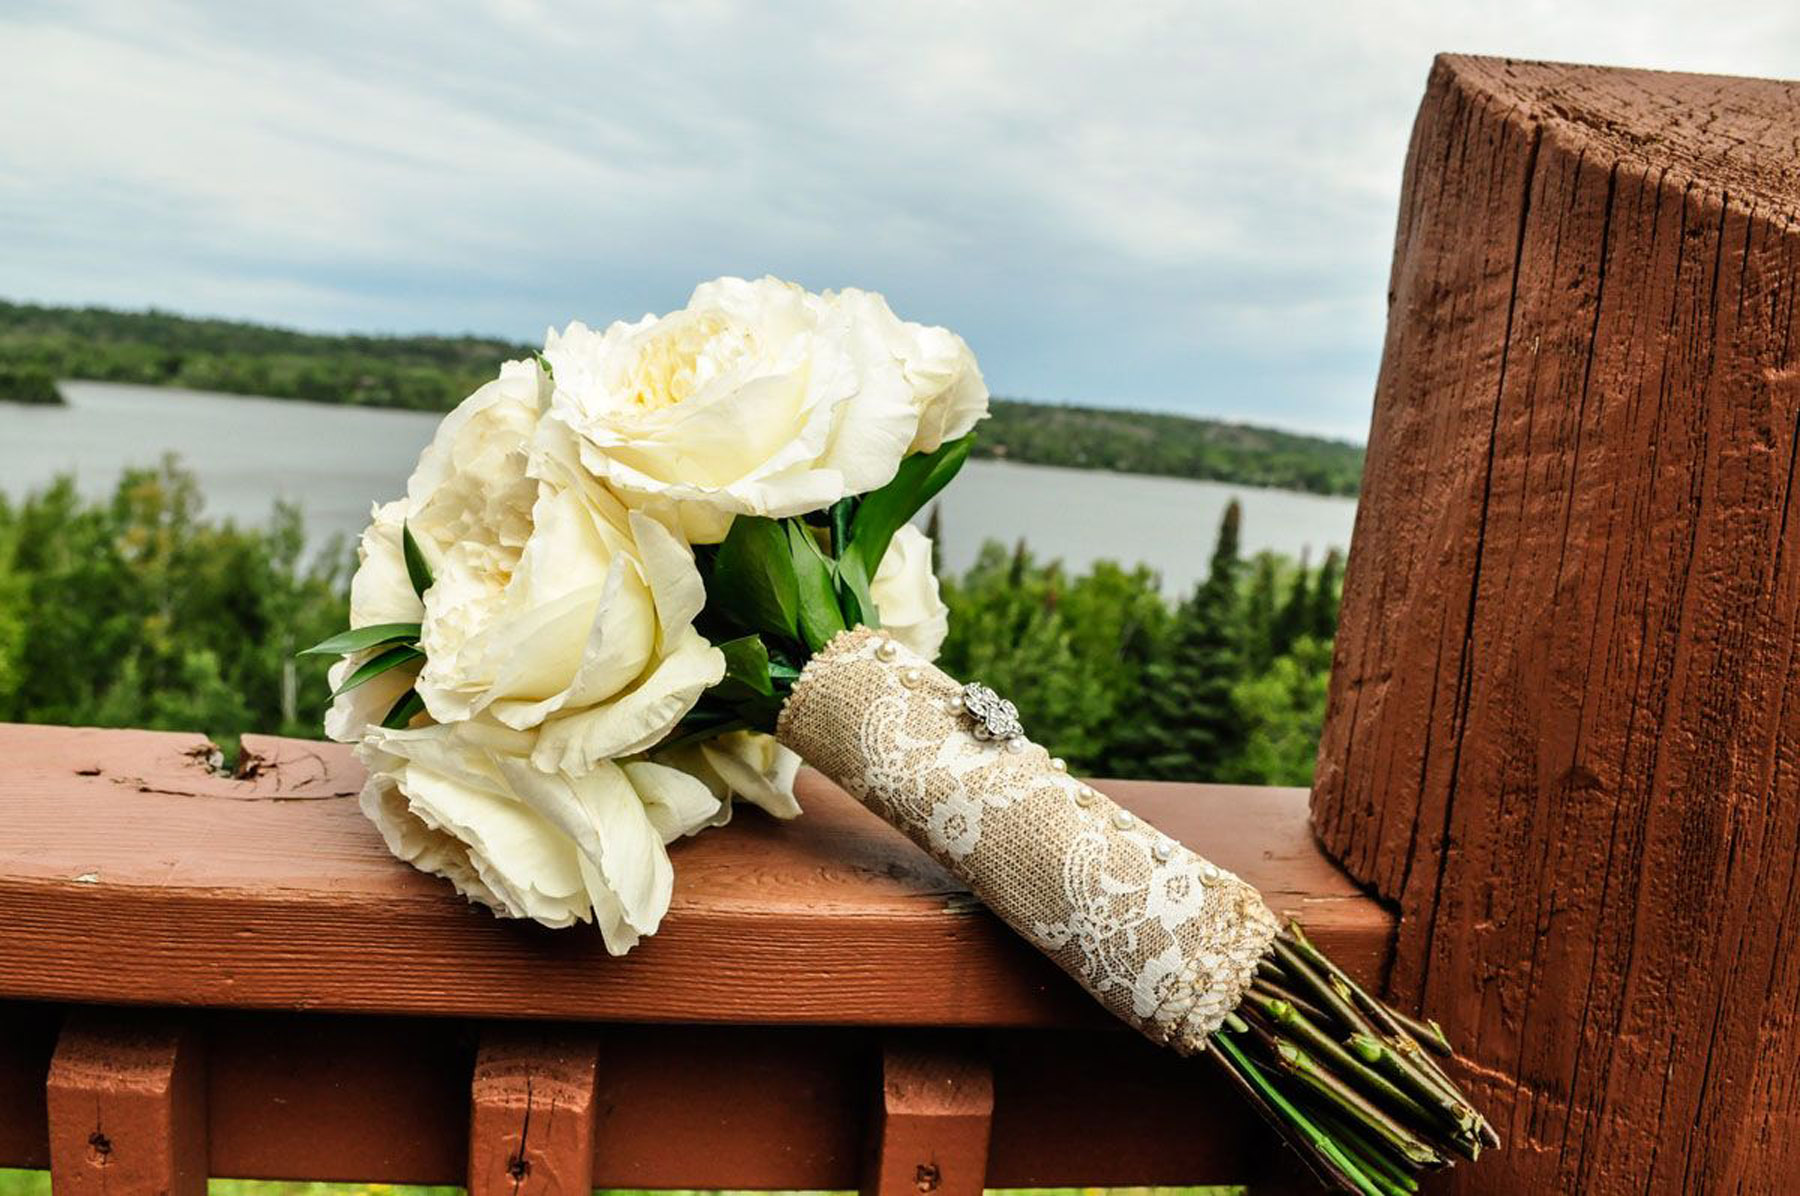 Bouquet of white roses laying atop Grand Ely Lodge balcony rail